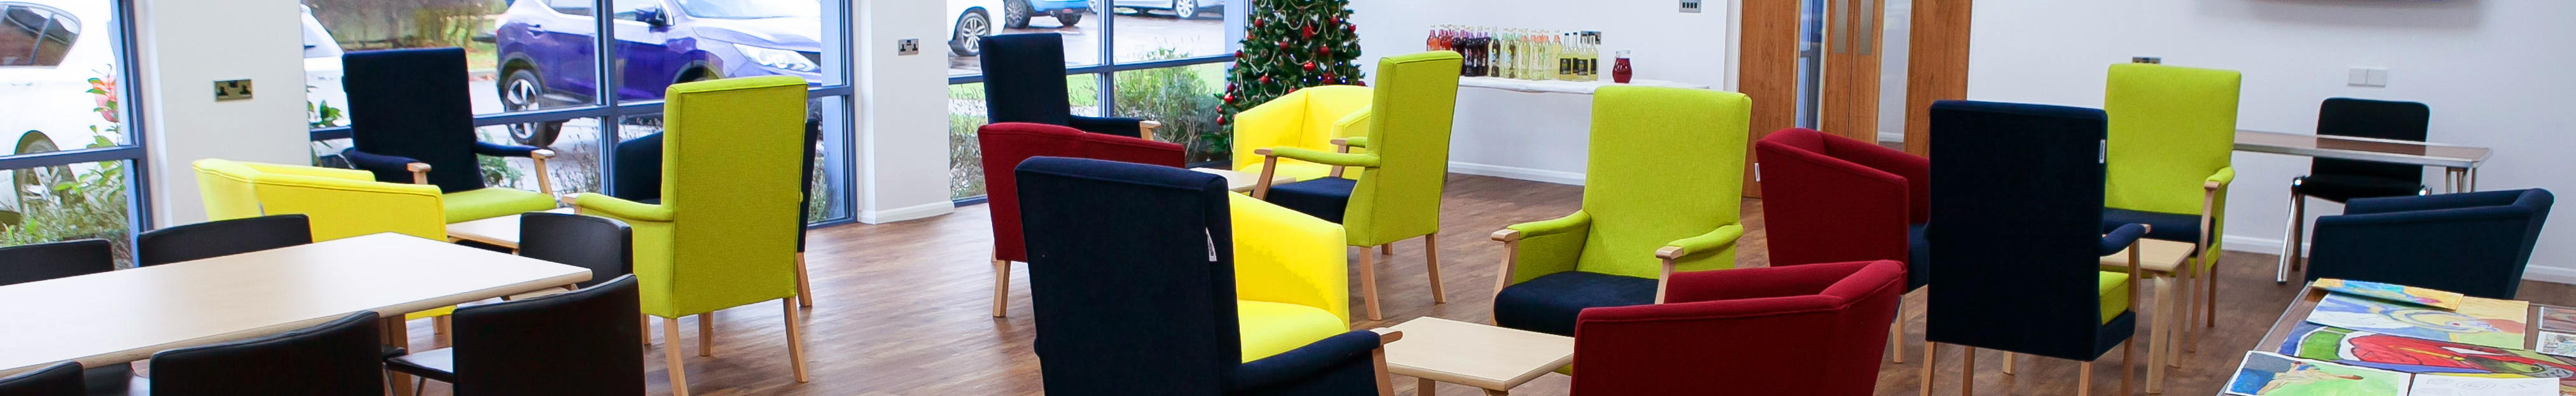 Dementia-friendly Jubilee Court with brightly colour chairs